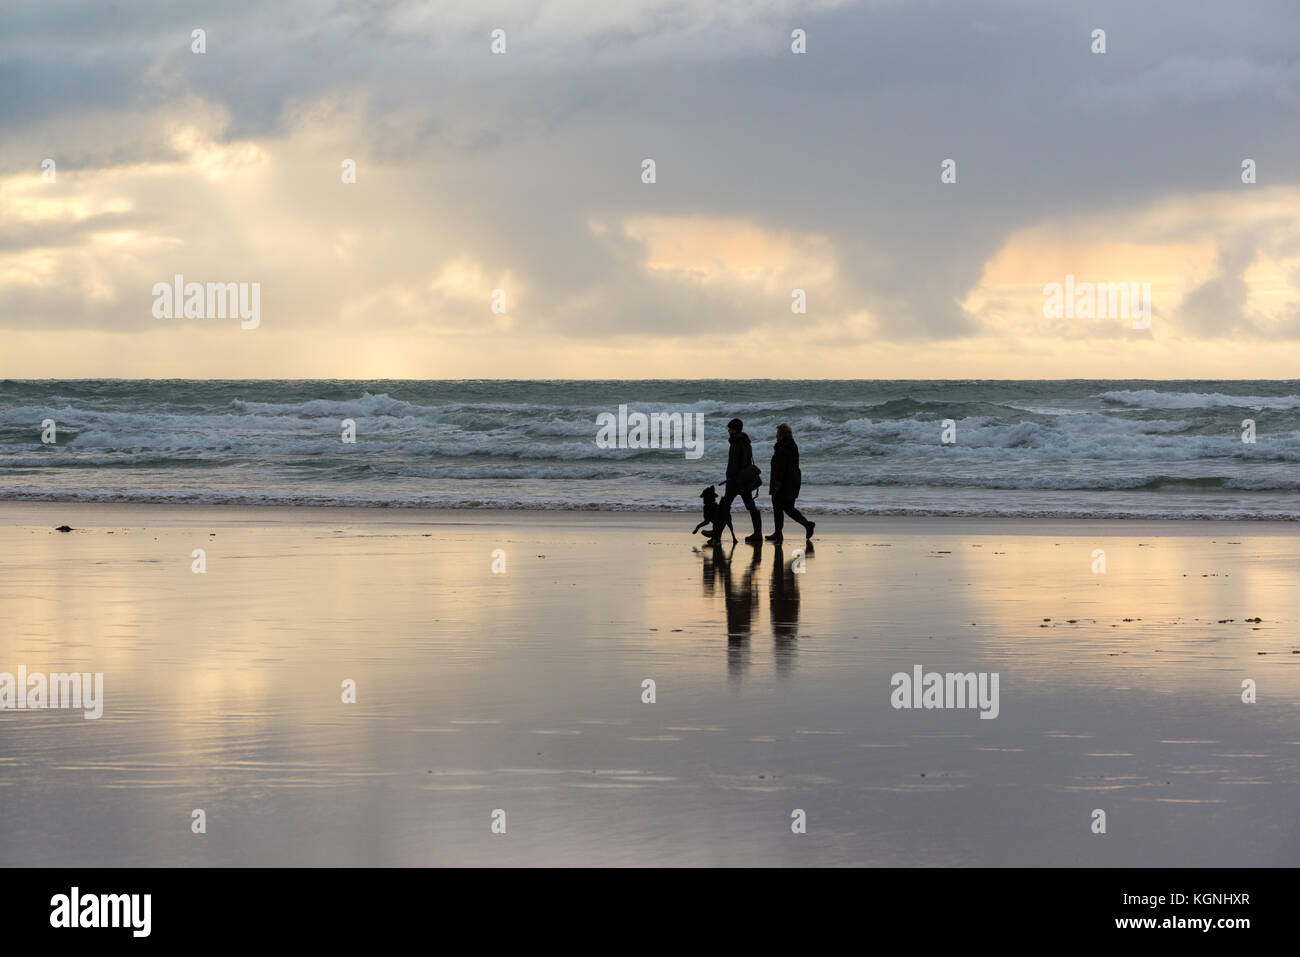 People walking along beach at sunset, Constantine Bay, St Merryn, Cornwall, November, with reflection in wet sand, UK Stock Photo